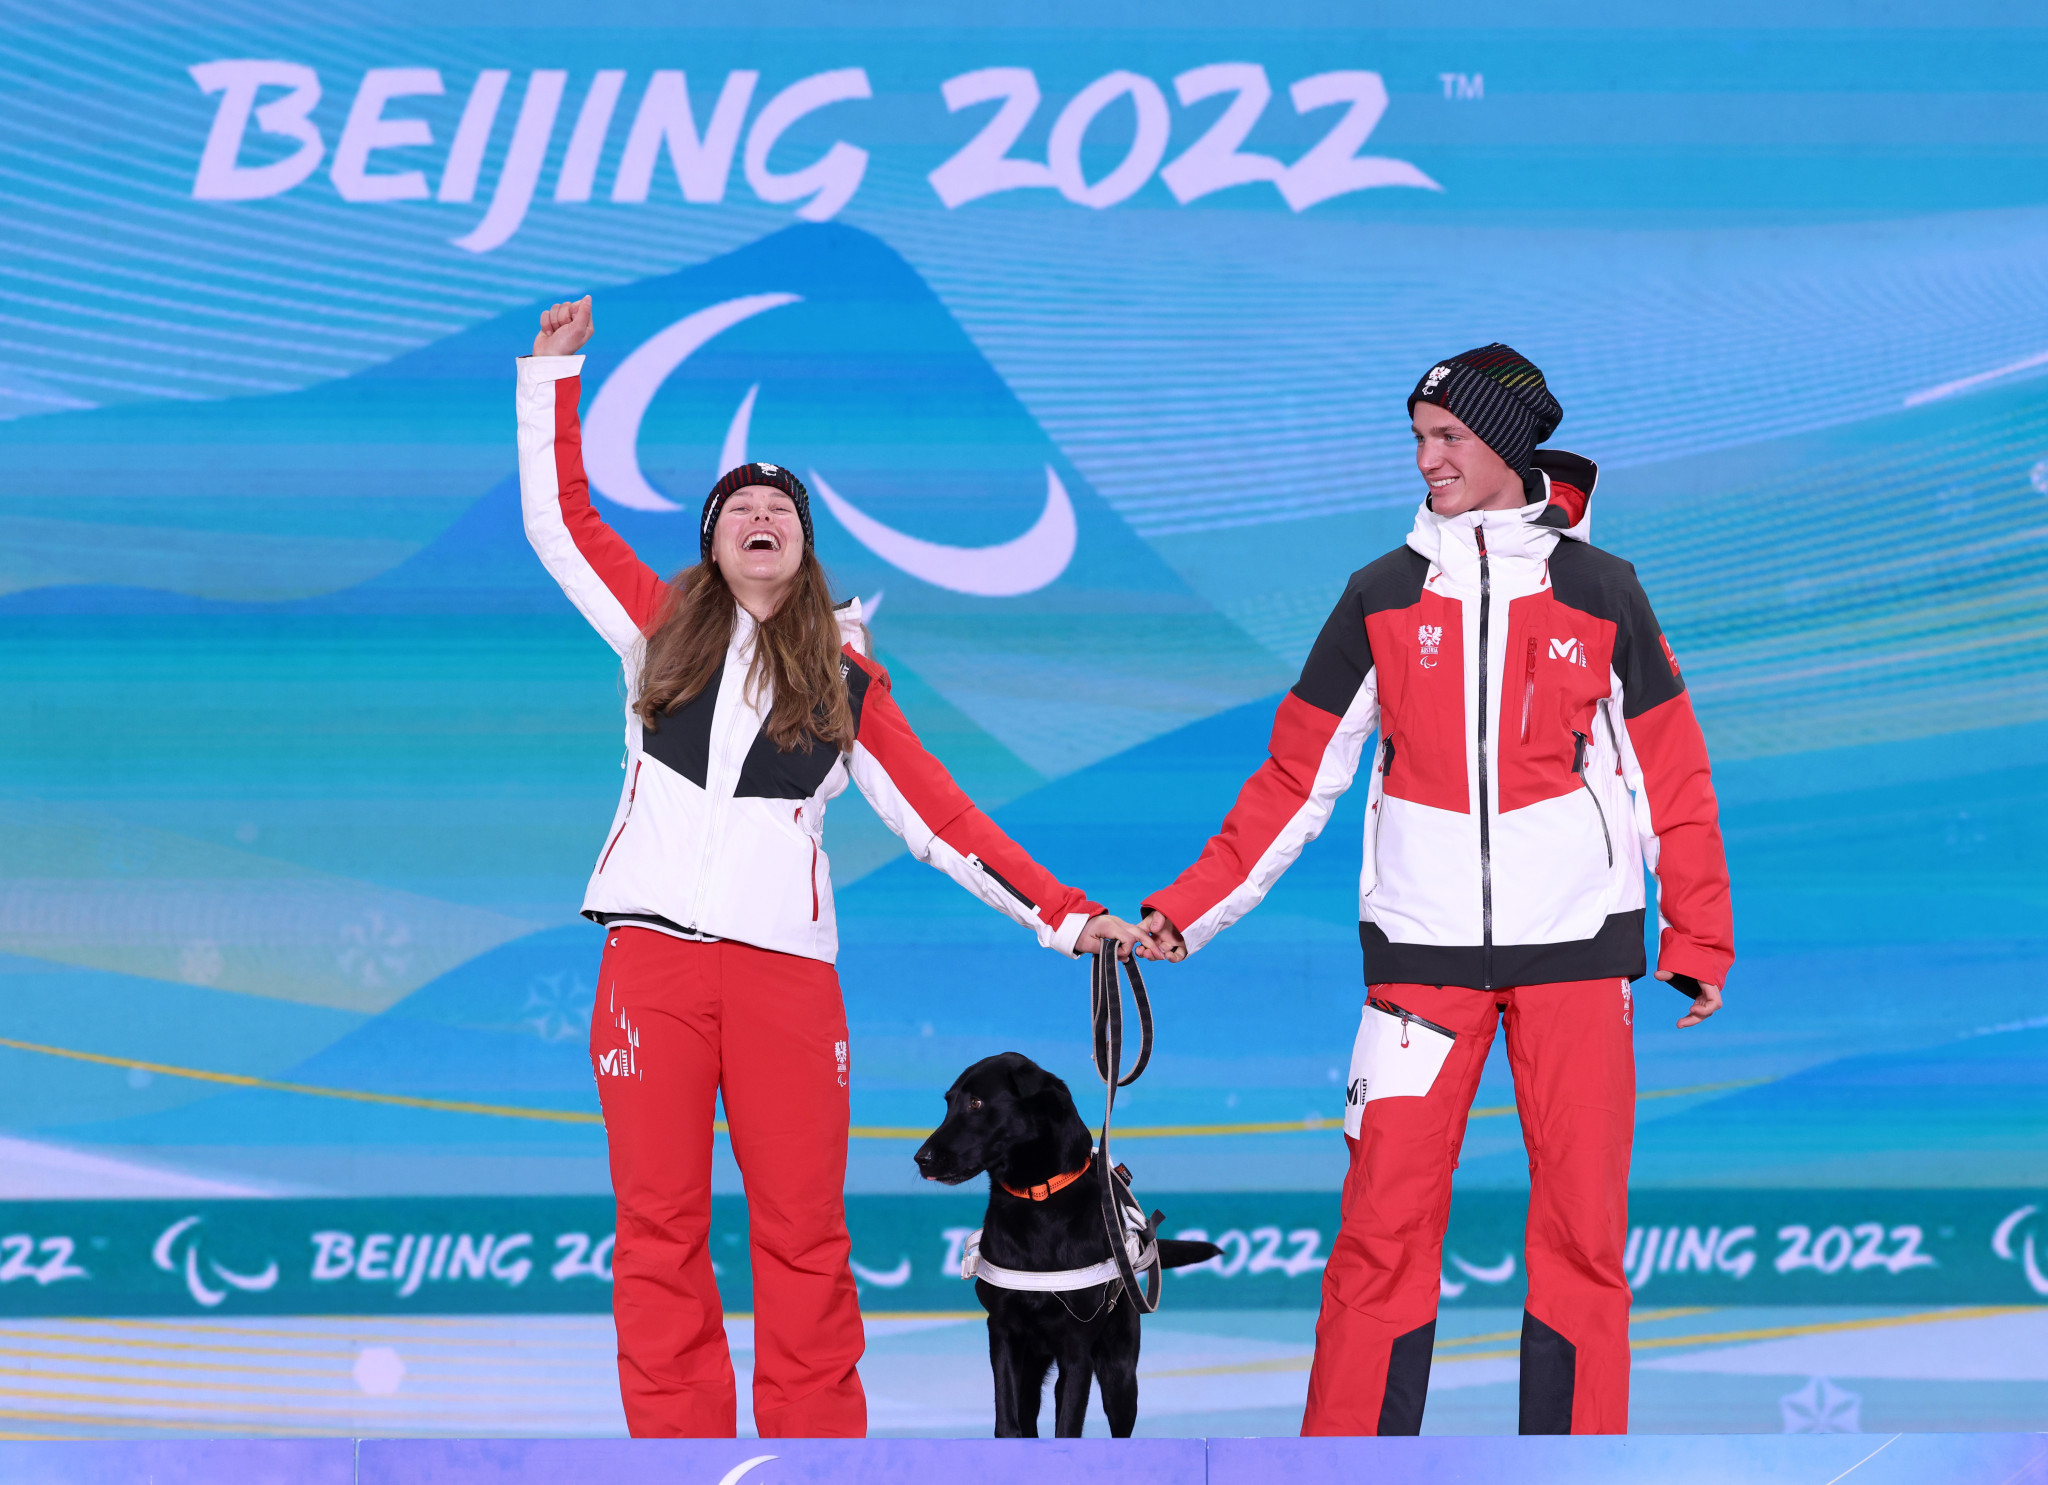 Gold medallist Edlinger thanks guide dog "more famous than the Chinese President" in Paralympic Village